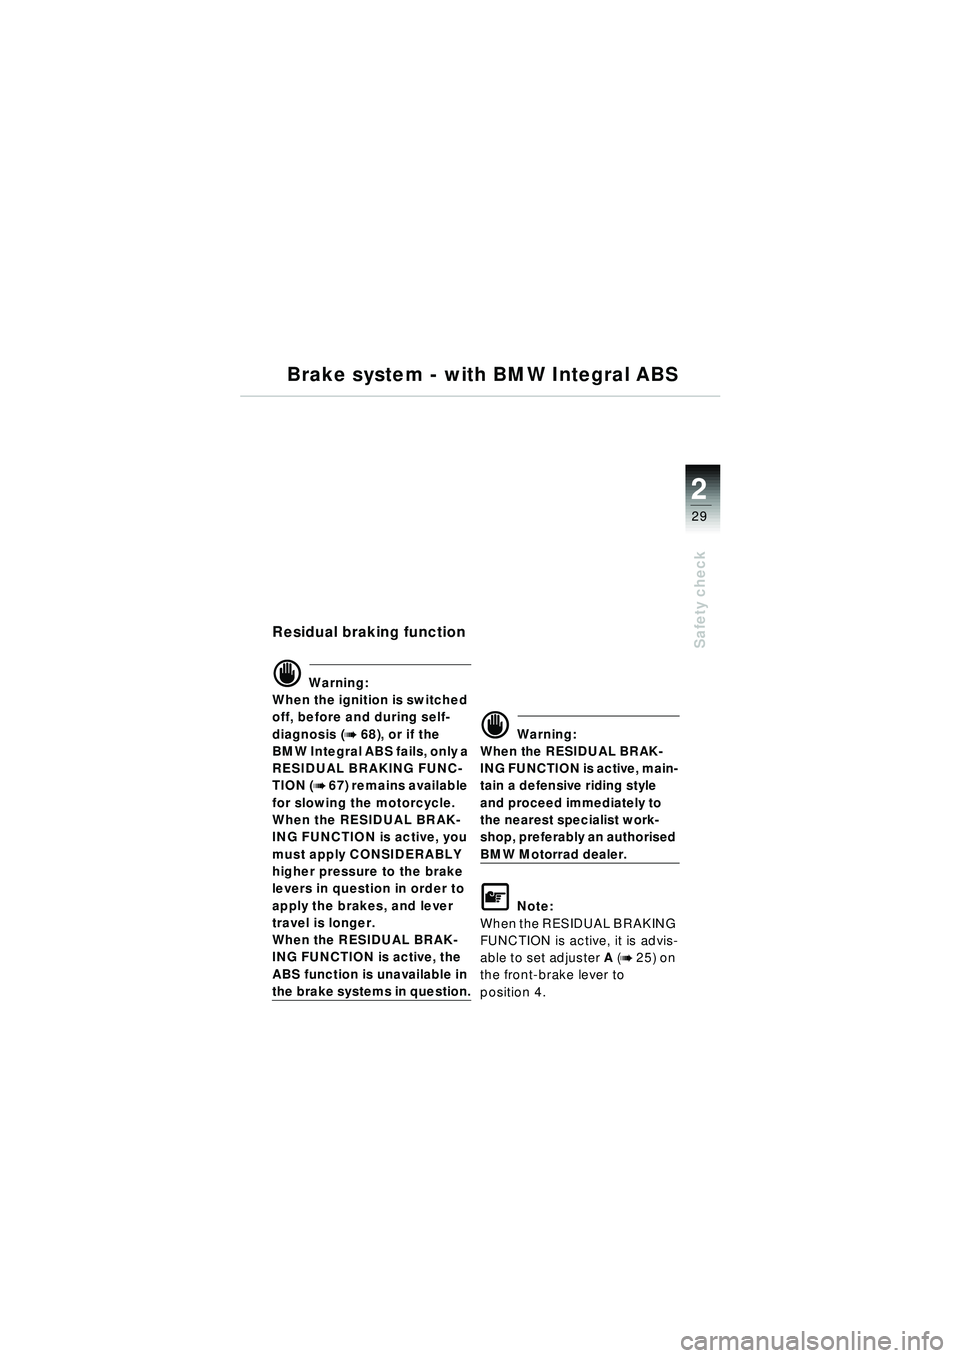 BMW MOTORRAD R 1150 RT 2002  Riders Manual (in English) 2
29
Safety check
Brake system - with BMW Integral ABS
Residual braking function
d Warning:
When the ignition is switched 
off, before and during self-
diagnosis (
b 68), or if the 
BMW Integral ABS f